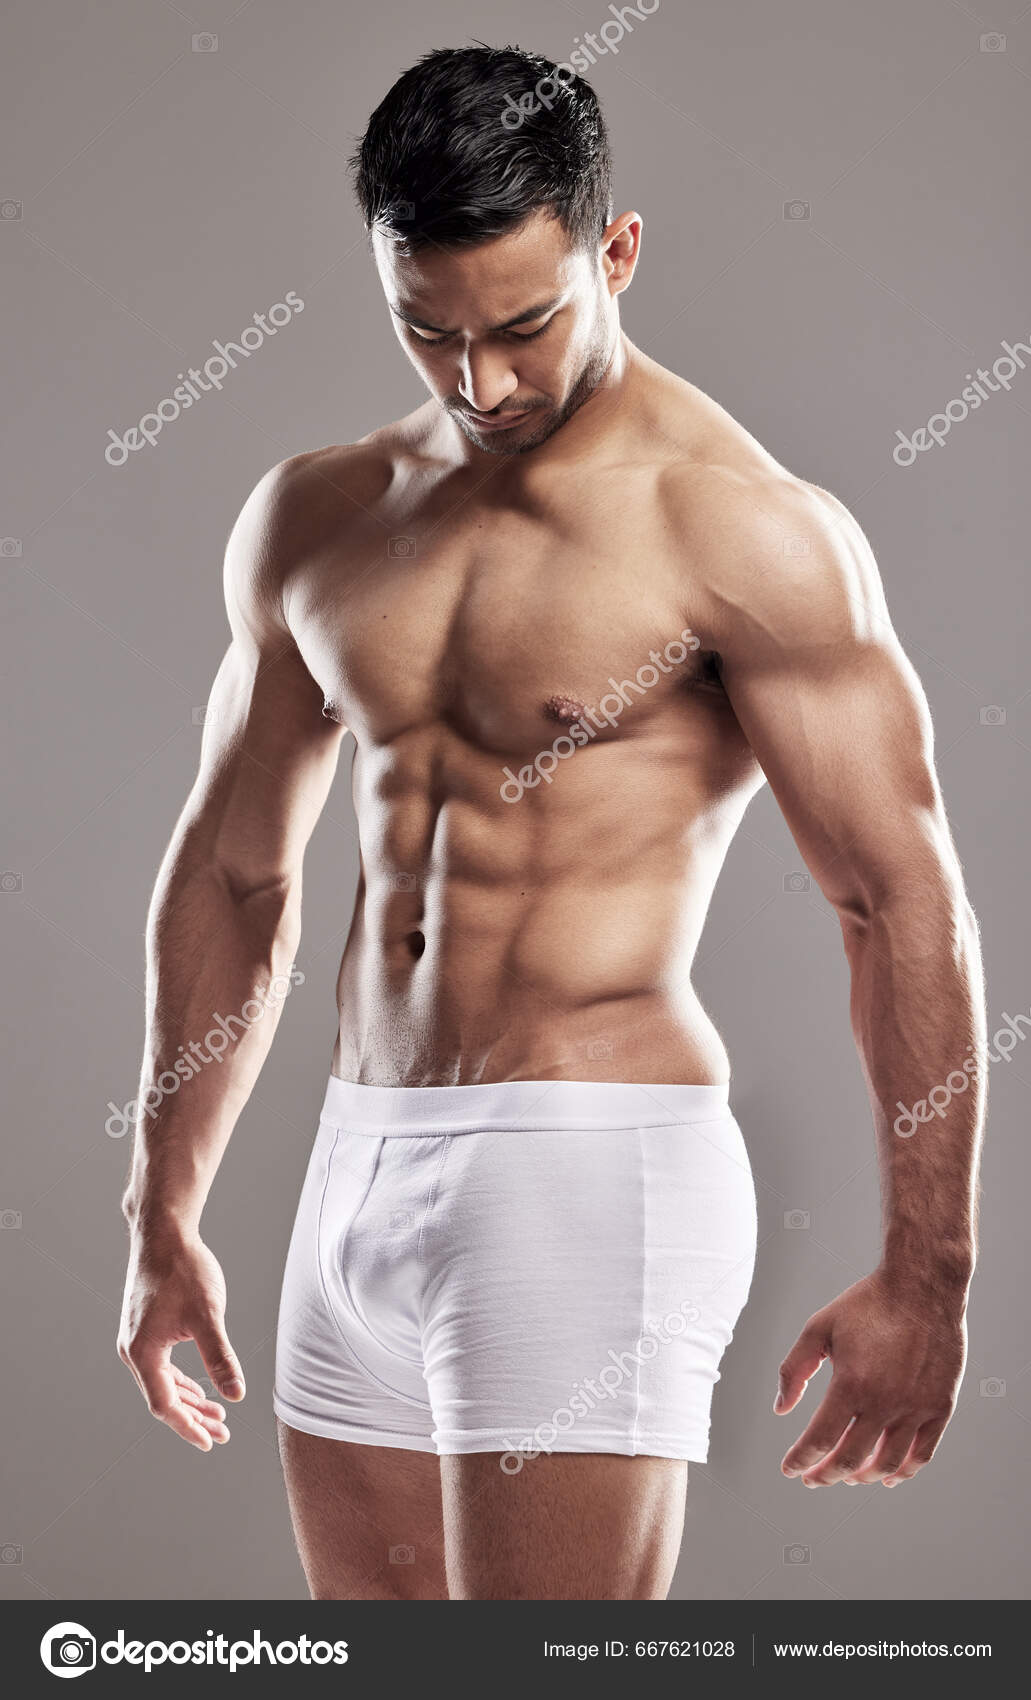 Man Underwear Model Muscle Care Strong Chest Abs Body Wellness Stock Photo  by ©PeopleImages.com 667621028